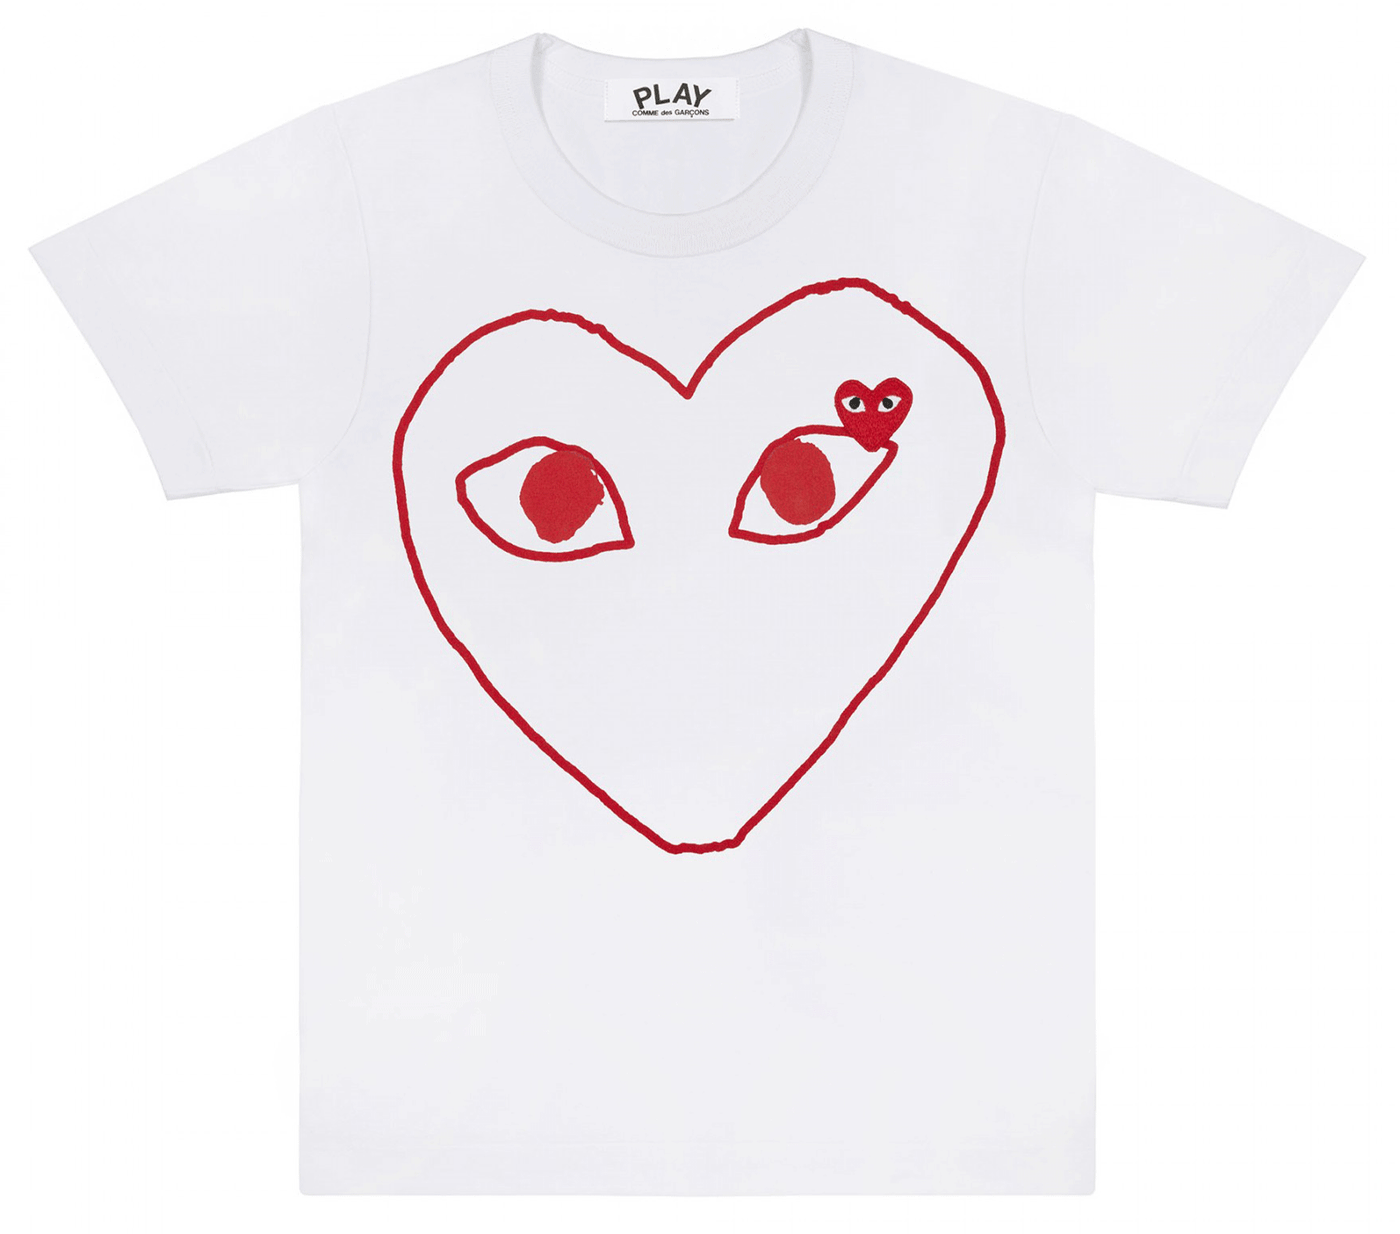 Comme-des-Garcons-Play-Red-Heart-Outline-T-Shirt-Men-White-1